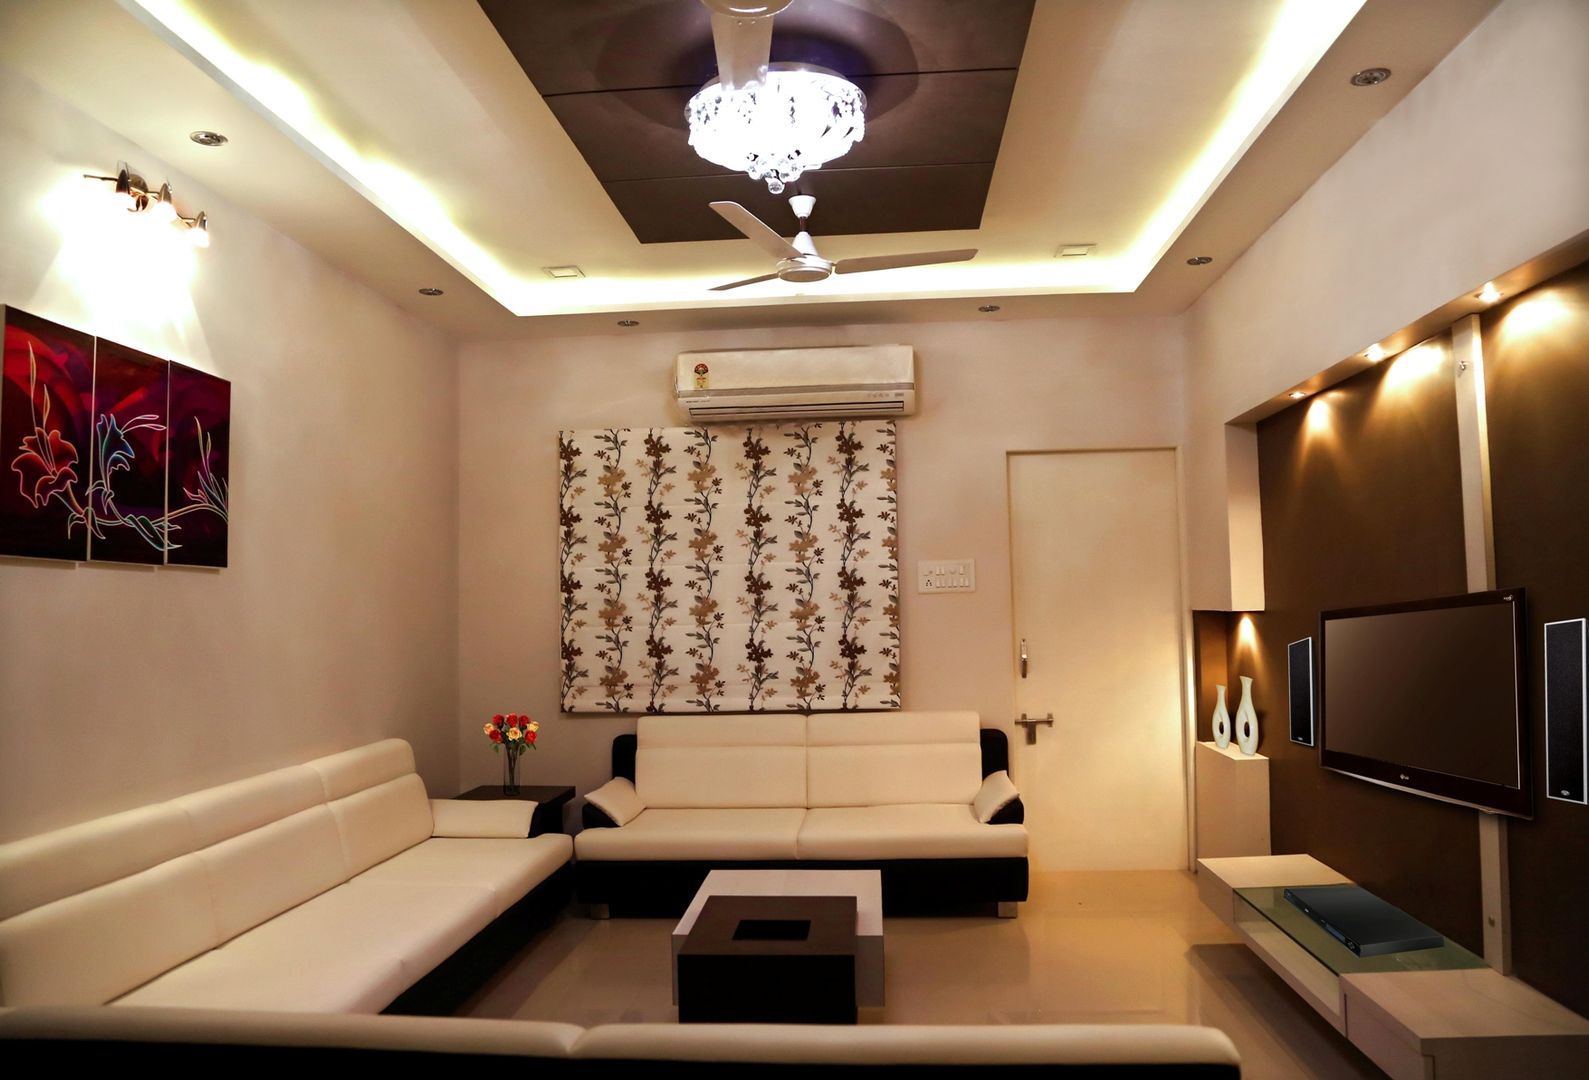 Dr. Mahesh Dama - 3 BHK Pent-house Interior, ZEAL Arch Designs ZEAL Arch Designs Nowoczesny salon Kanapy i fotele